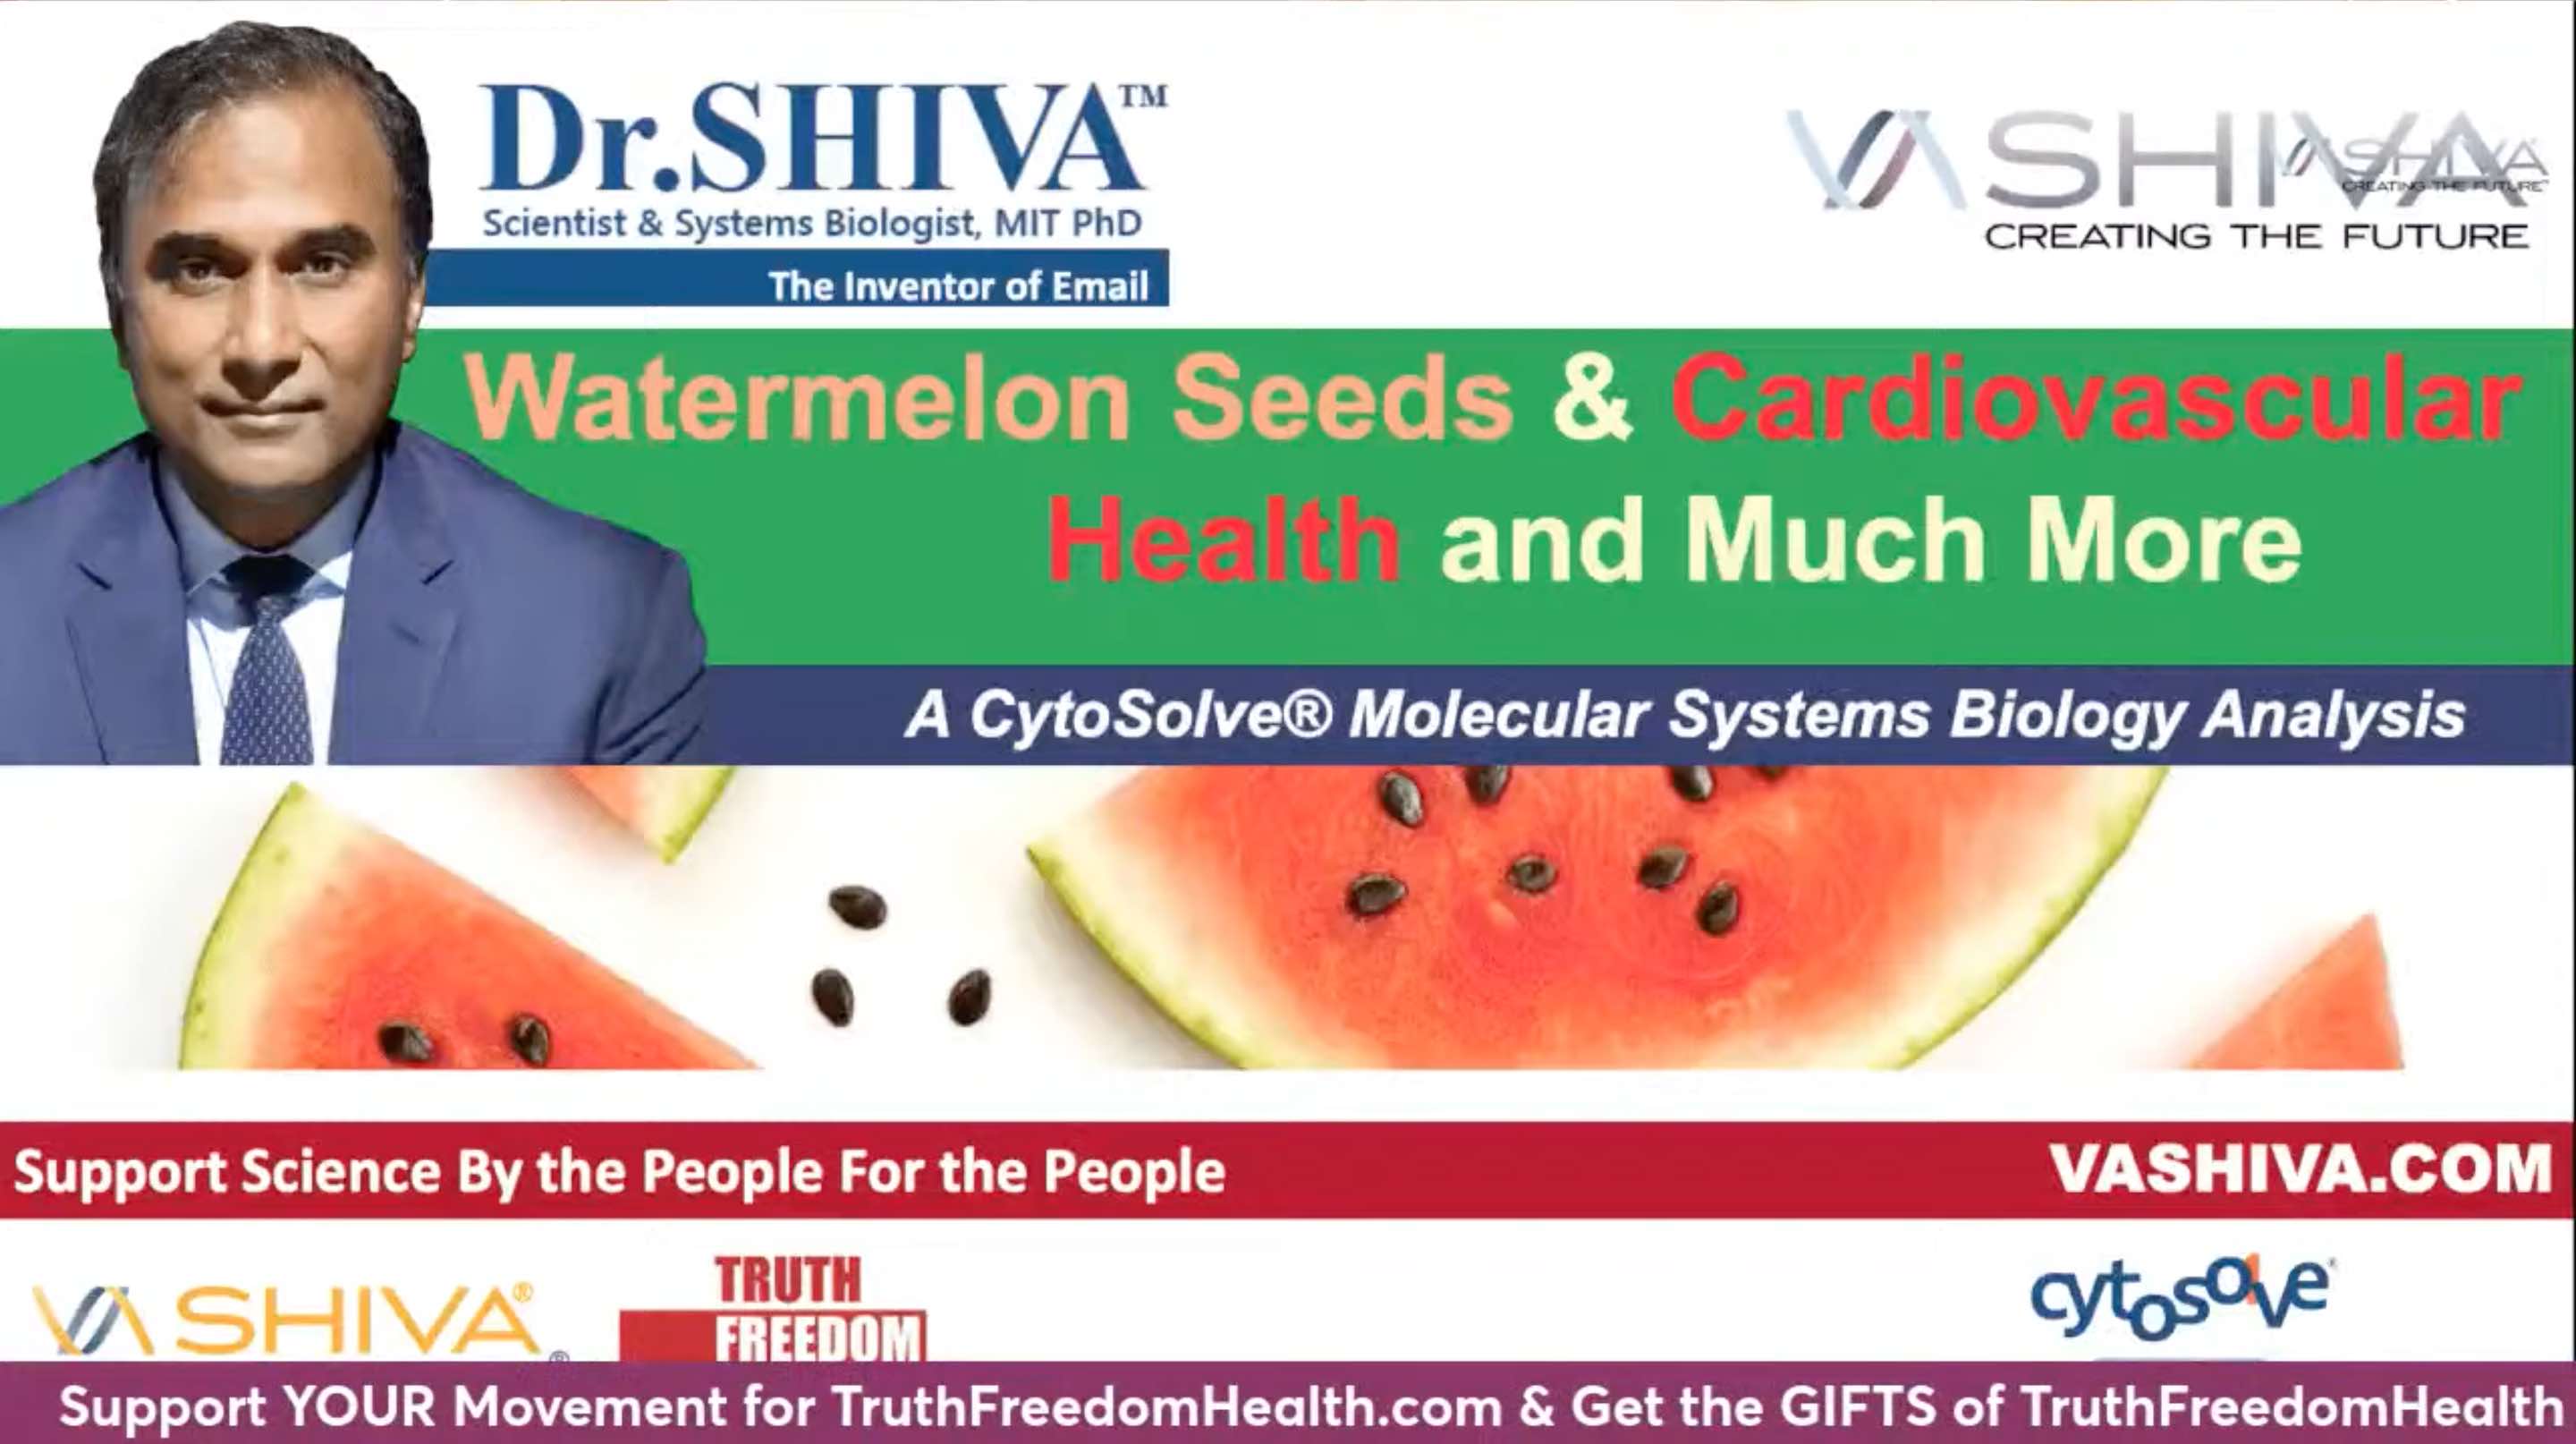 Dr.SHIVA LIVE: Watermelon Seeds & Cardiovascular Health and Much More.